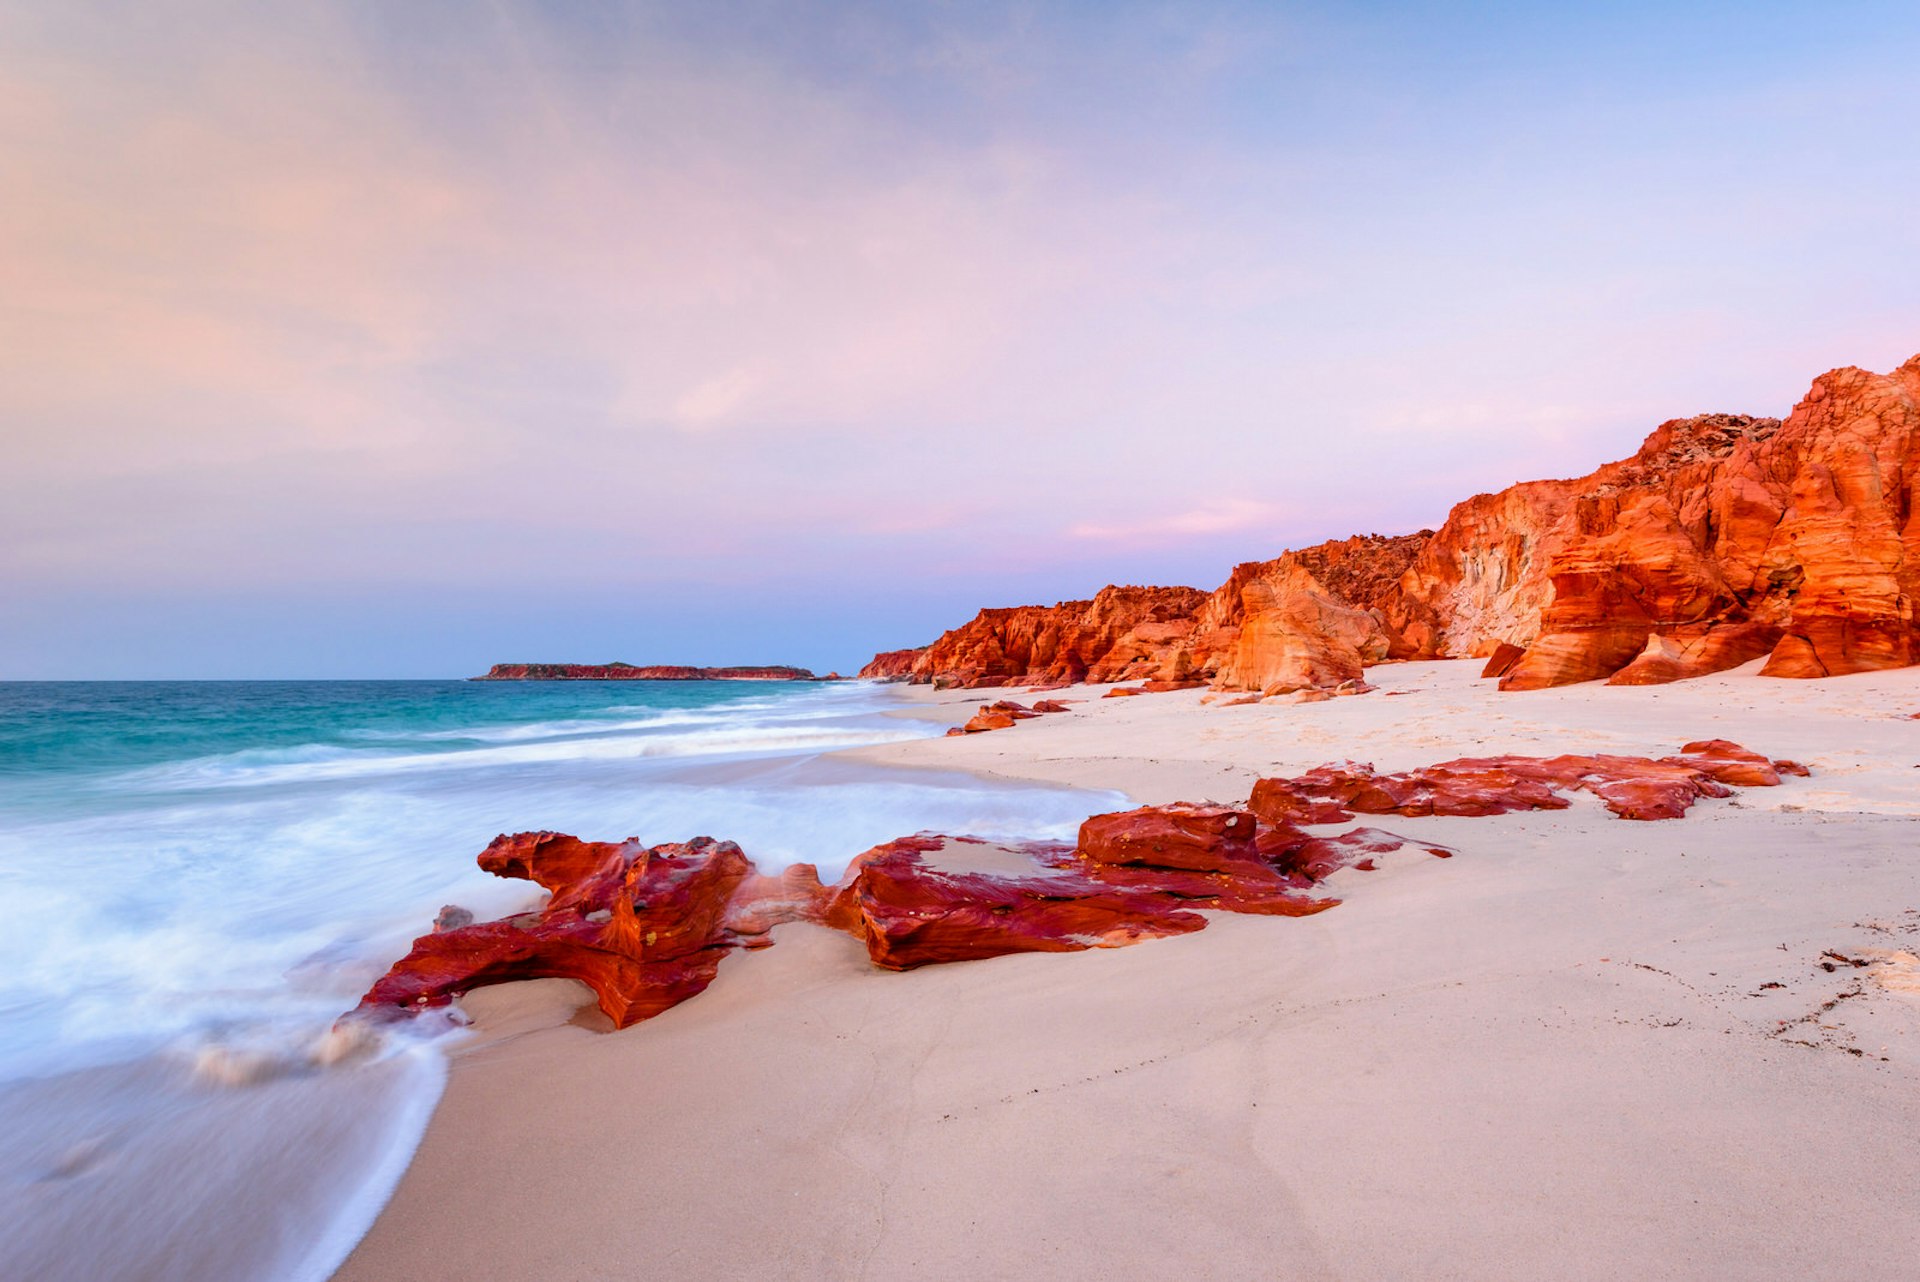 White sandy beach and red rock formations on the western side of Cape Leveque at dusk.